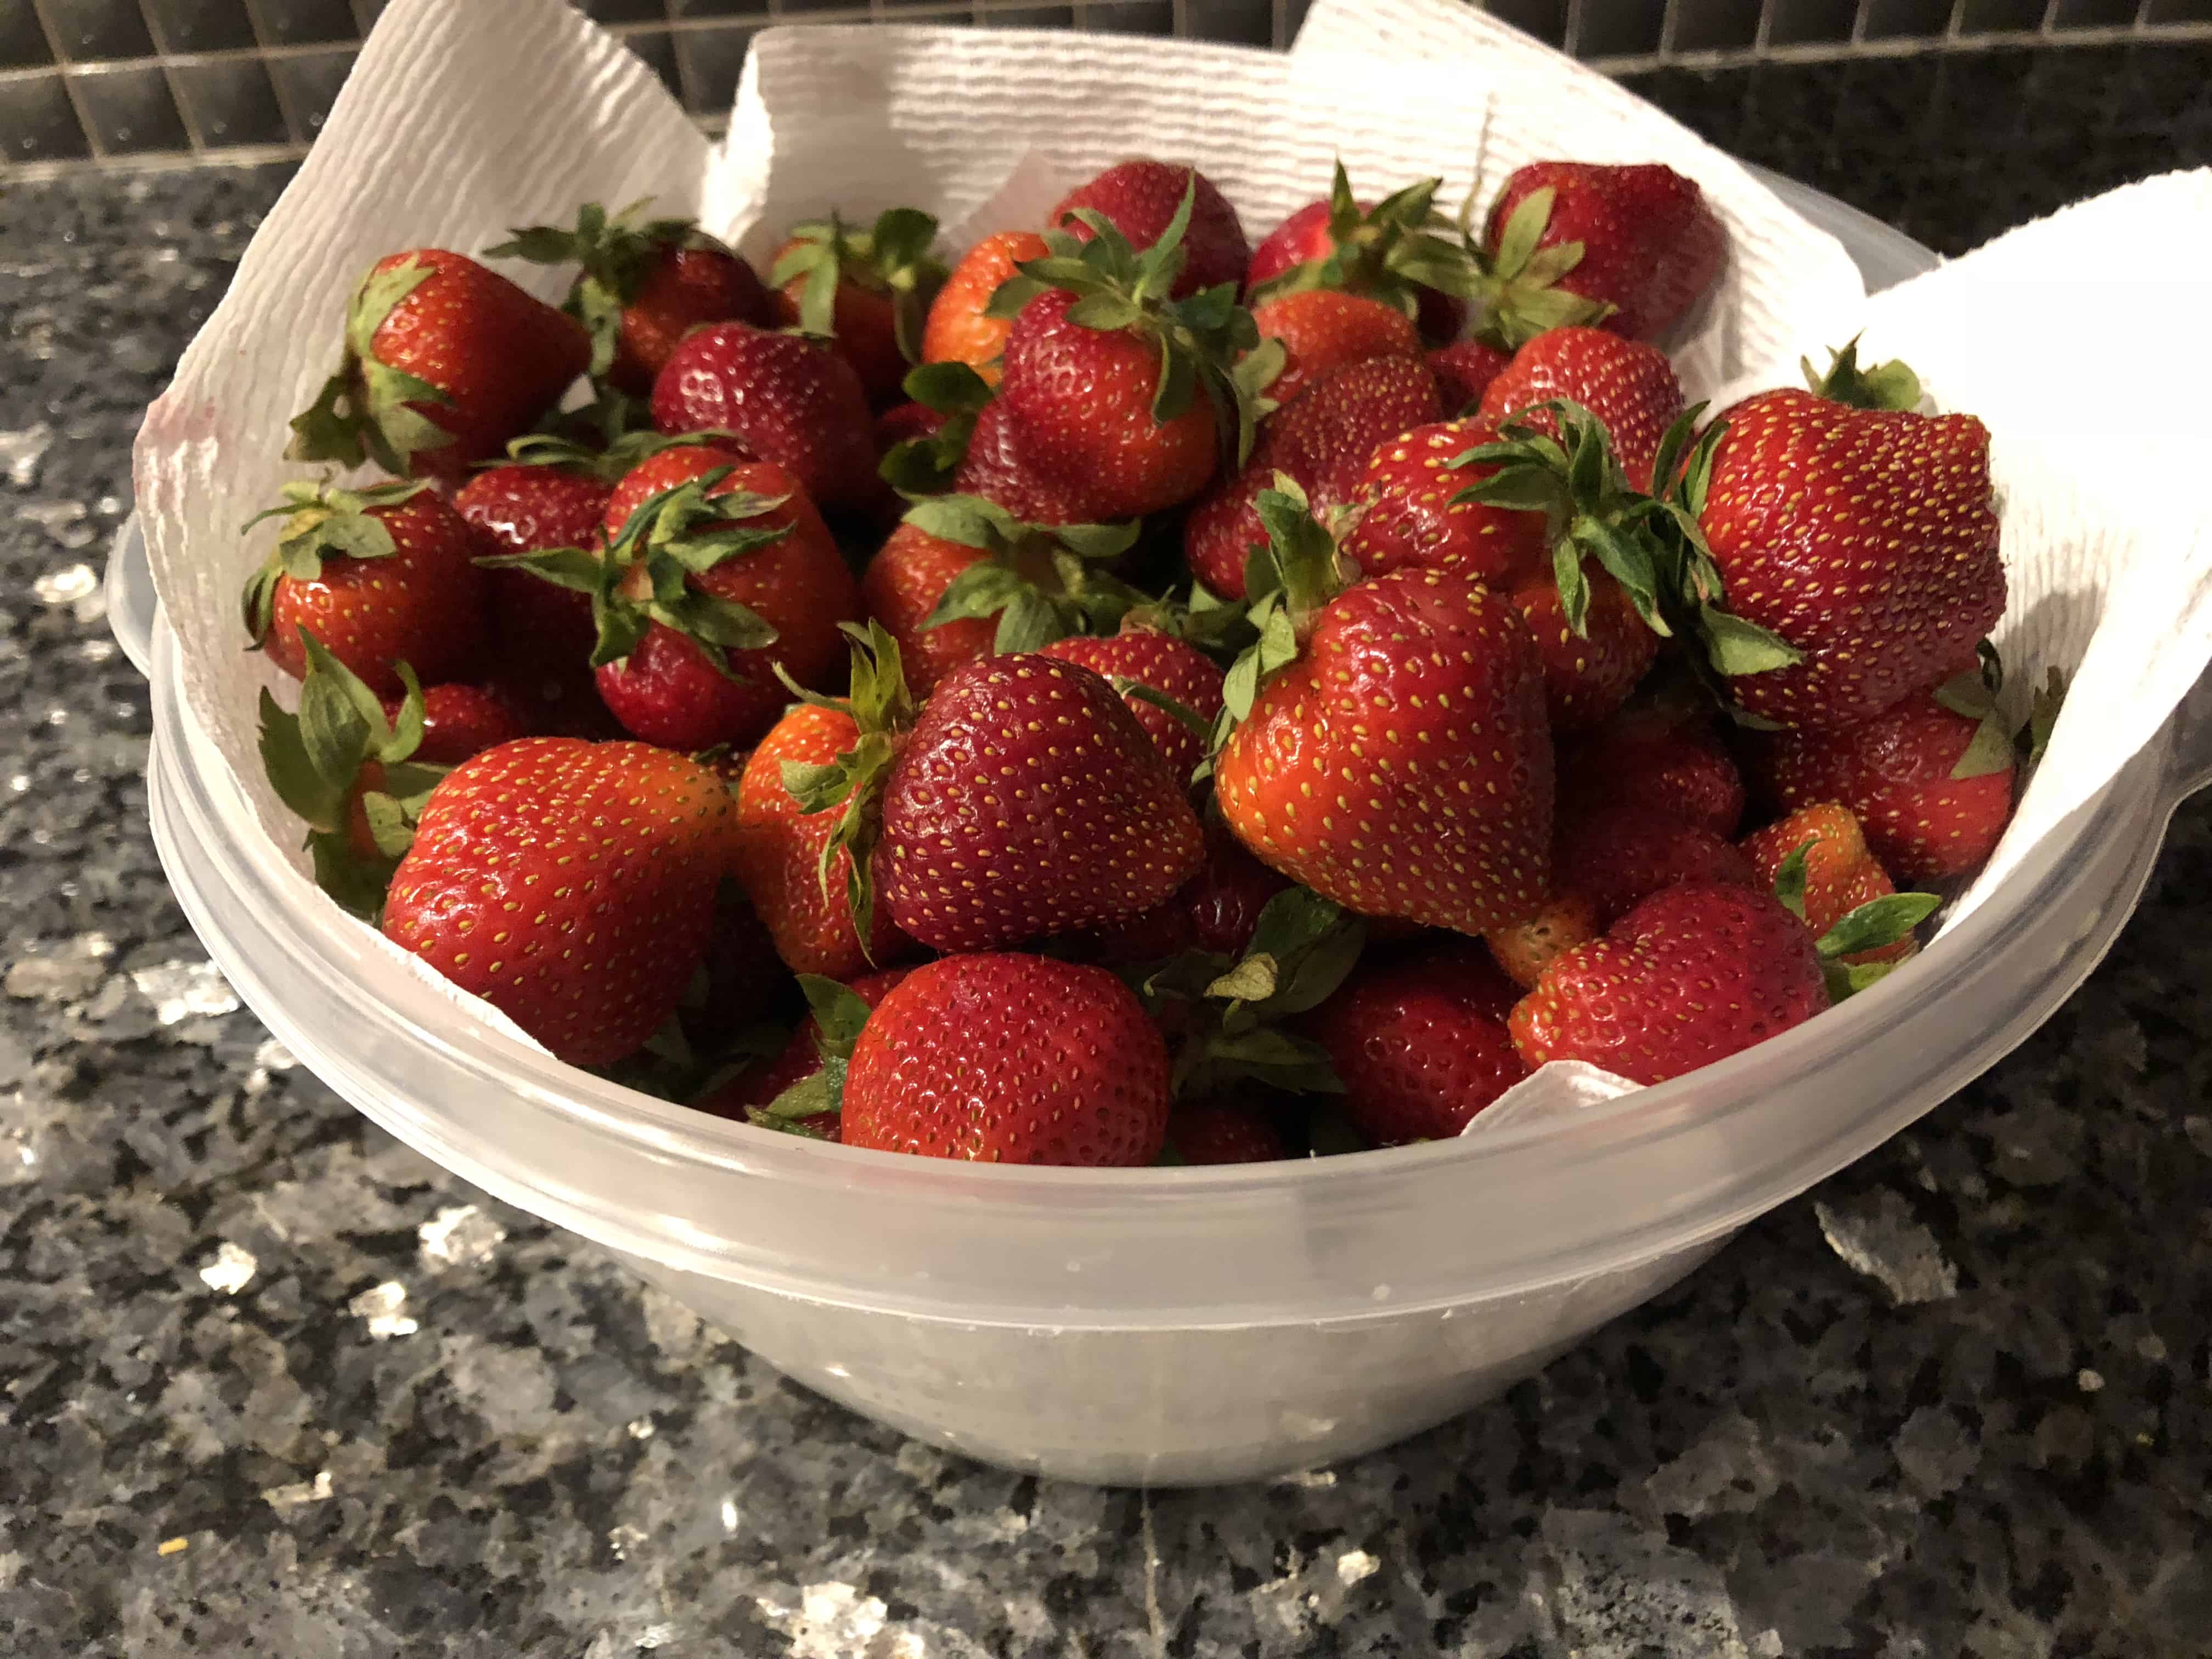 Store in a paper towel lined bowl to keep strawberries fresh